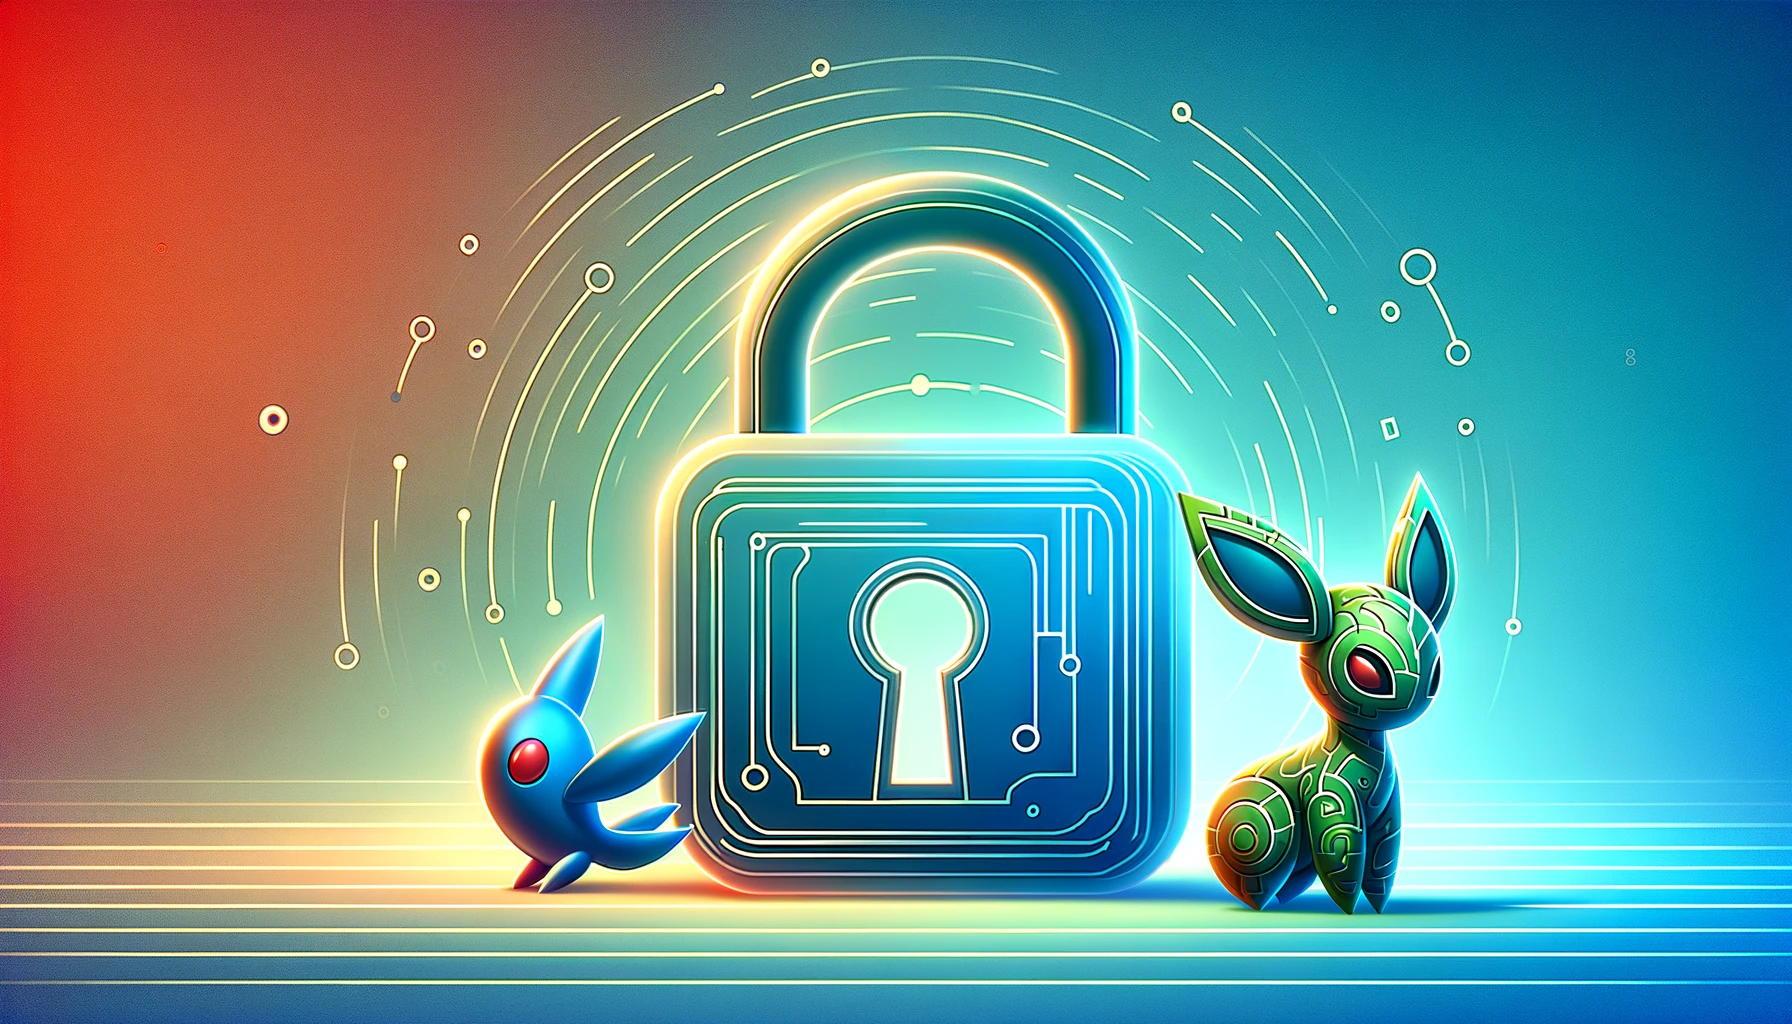 Pokémon Resets Password for Certain Users Against Hacking Attempts